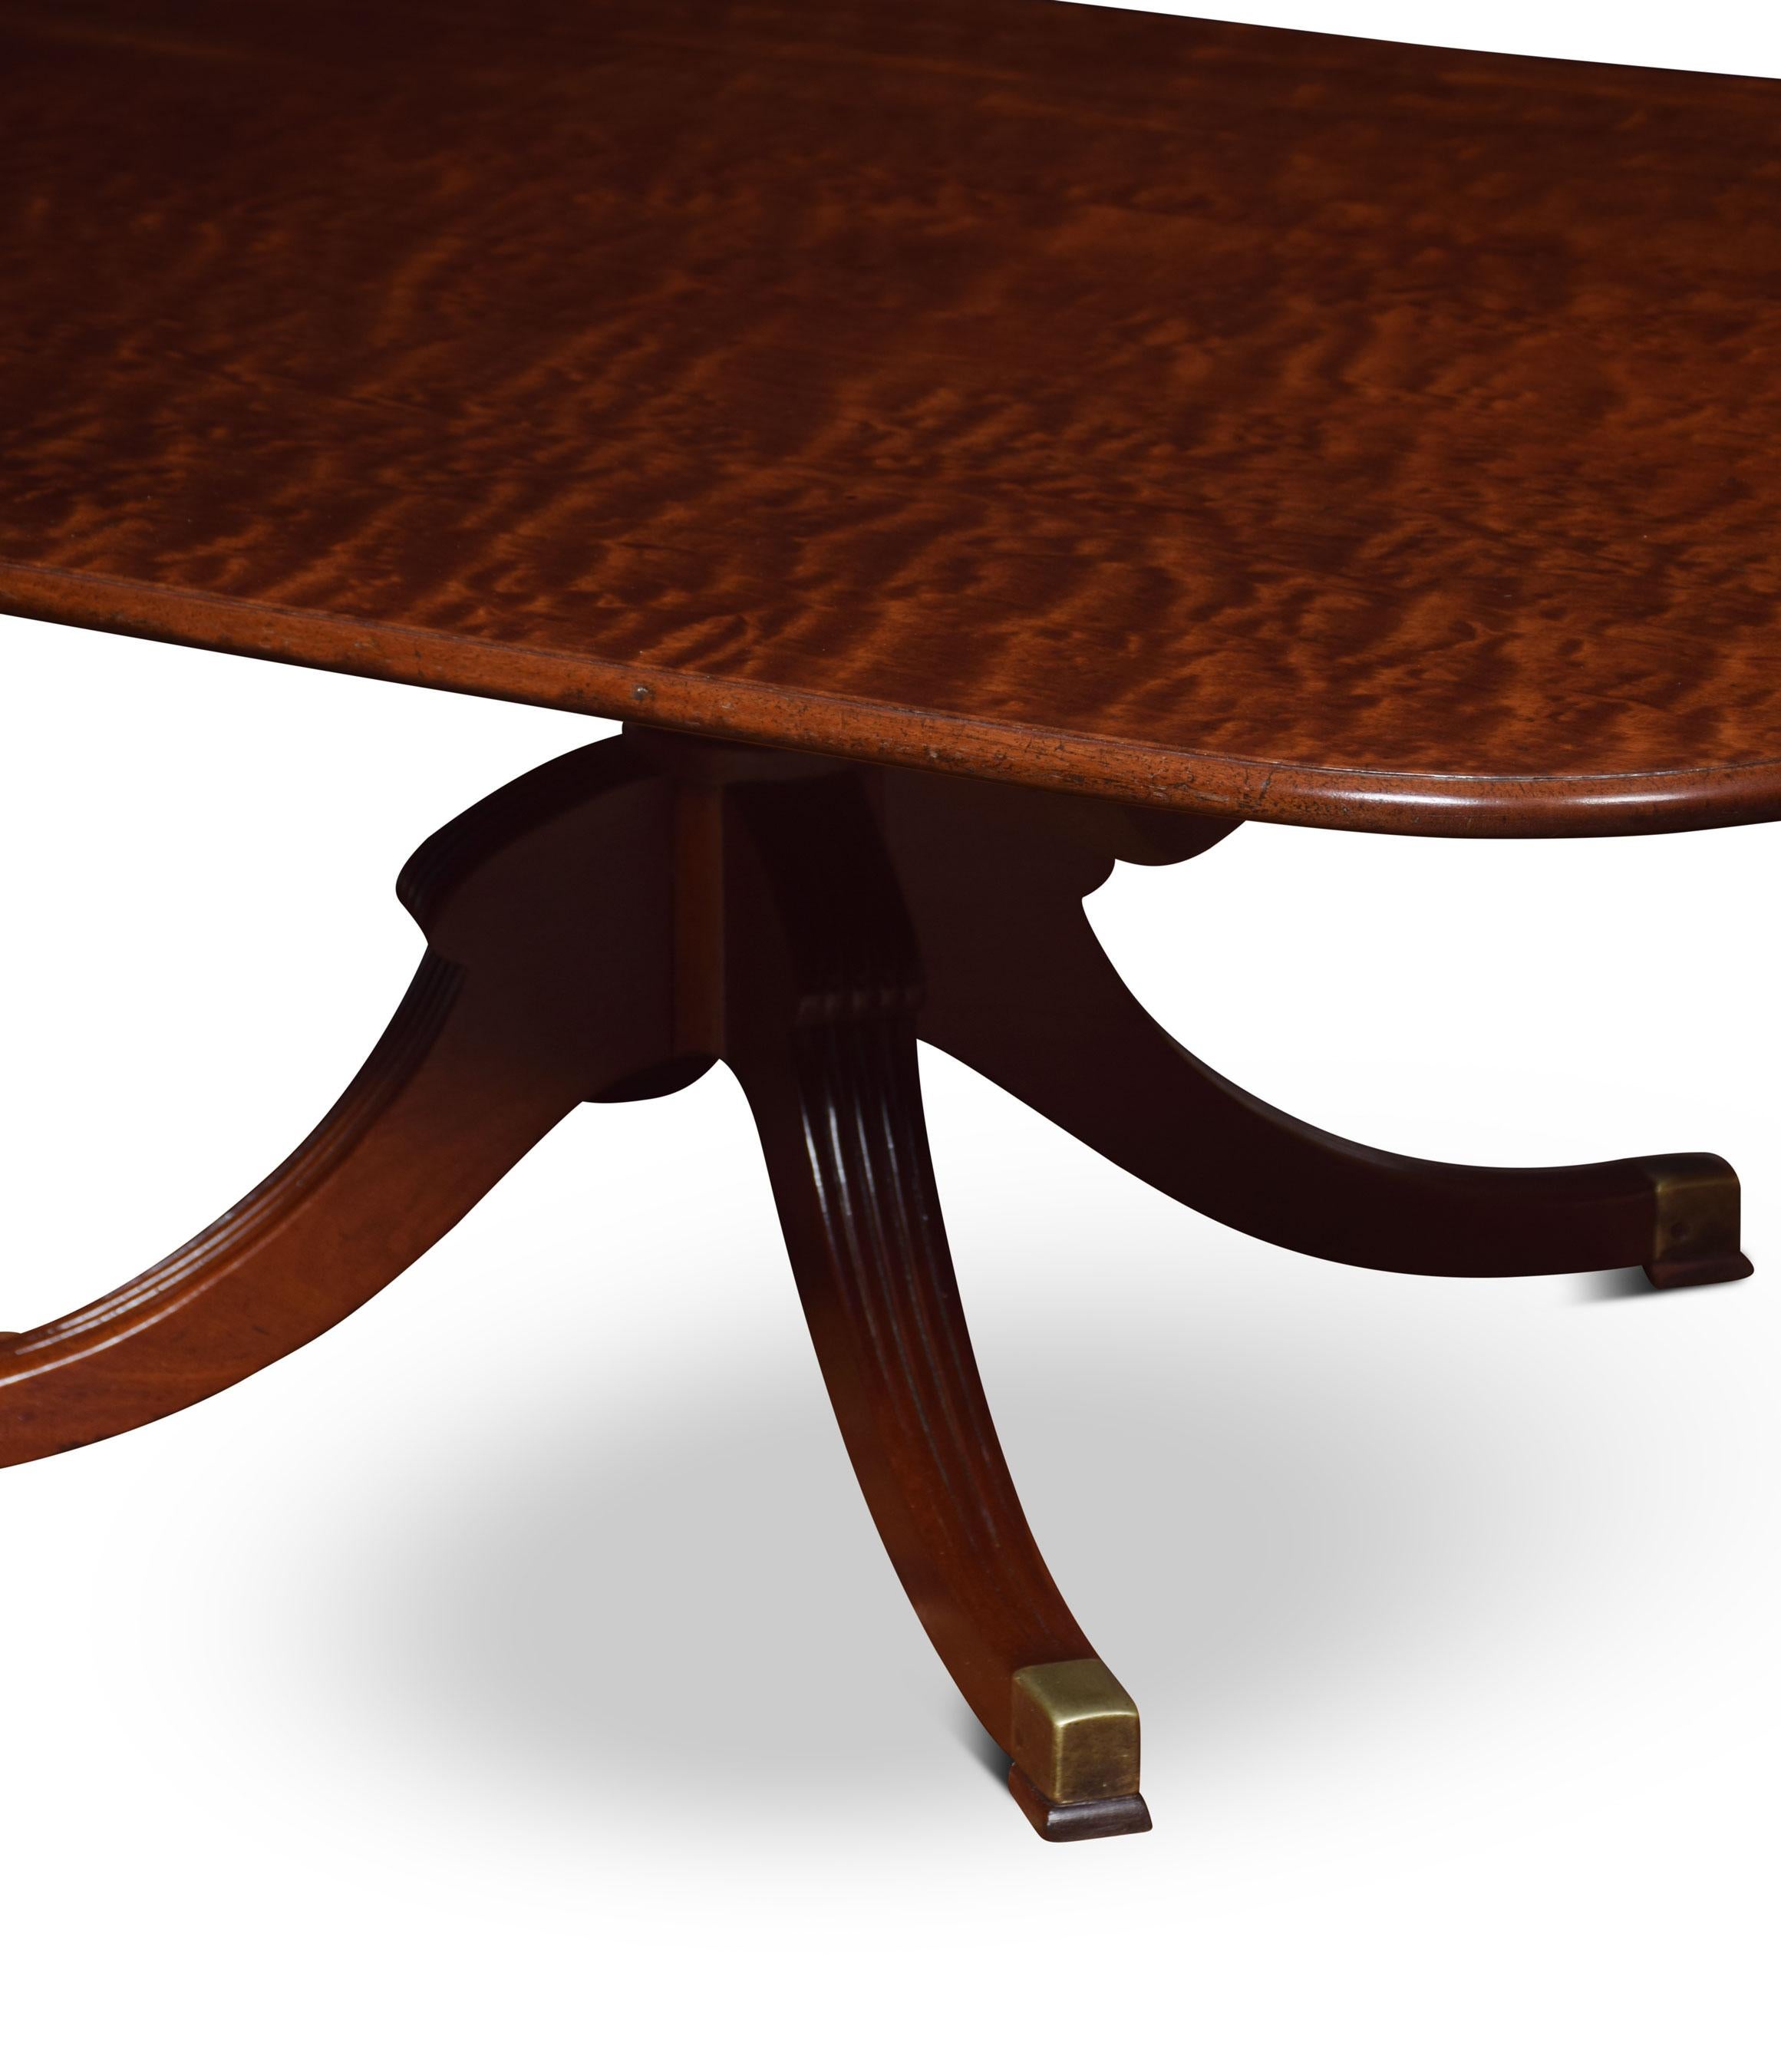 19th century mahogany coffee table, the rectangular top raised on a pedestal base and four out swept legs. This table has been reduced to coffee table height
Dimensions:
Height 22 inches
Width 54.5 inches
Depth 37 inches.